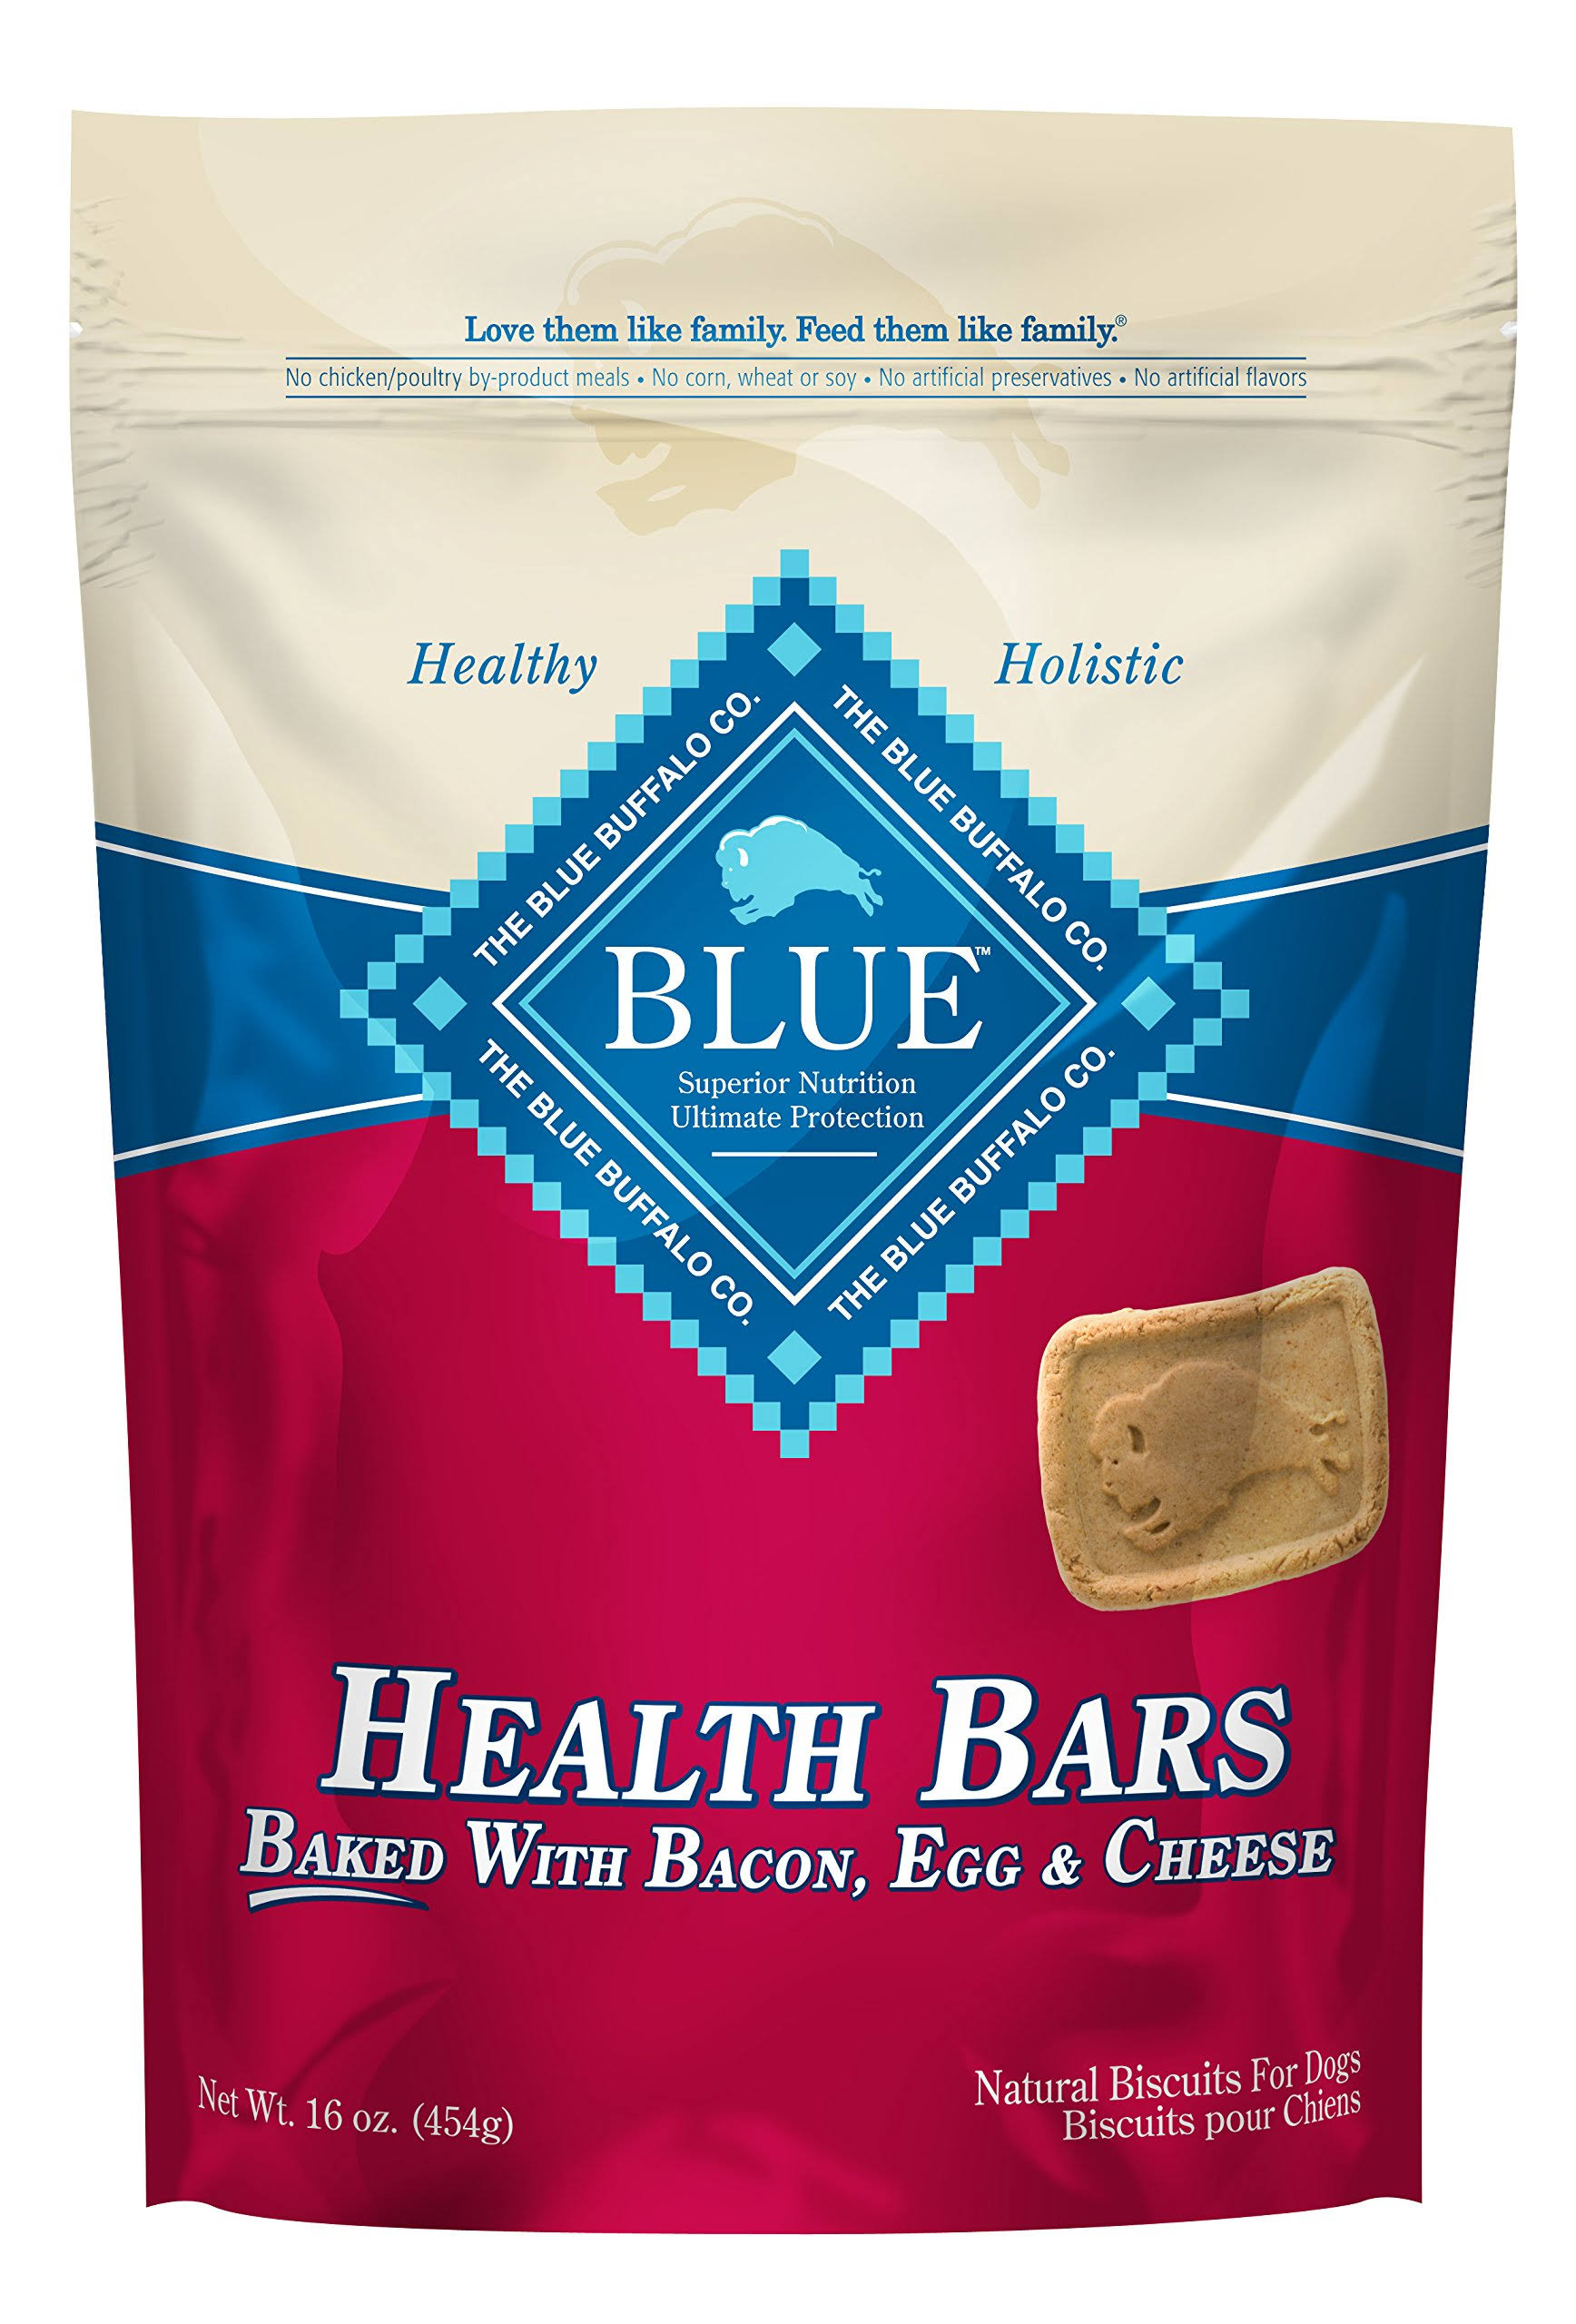 Blue Buffalo Health Bars for Dogs - Baked with Bacon, Egg and Cheese, 16oz